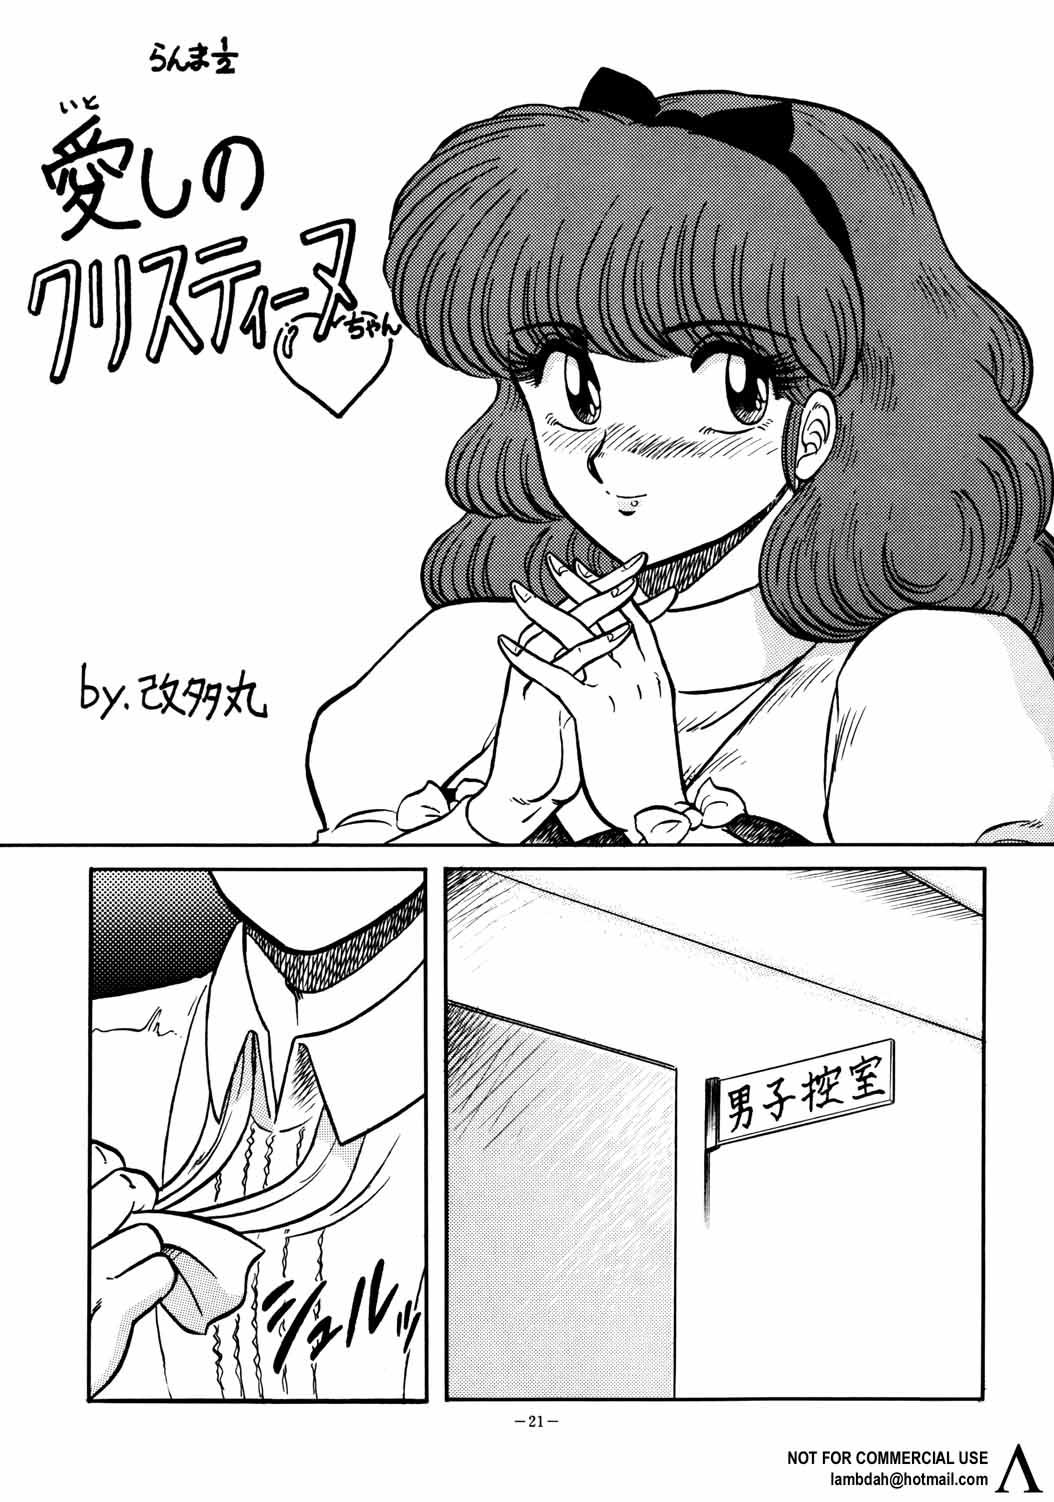 Pounded Look Out 26 - Sailor moon Ranma 12 Video girl ai Verga - Page 9